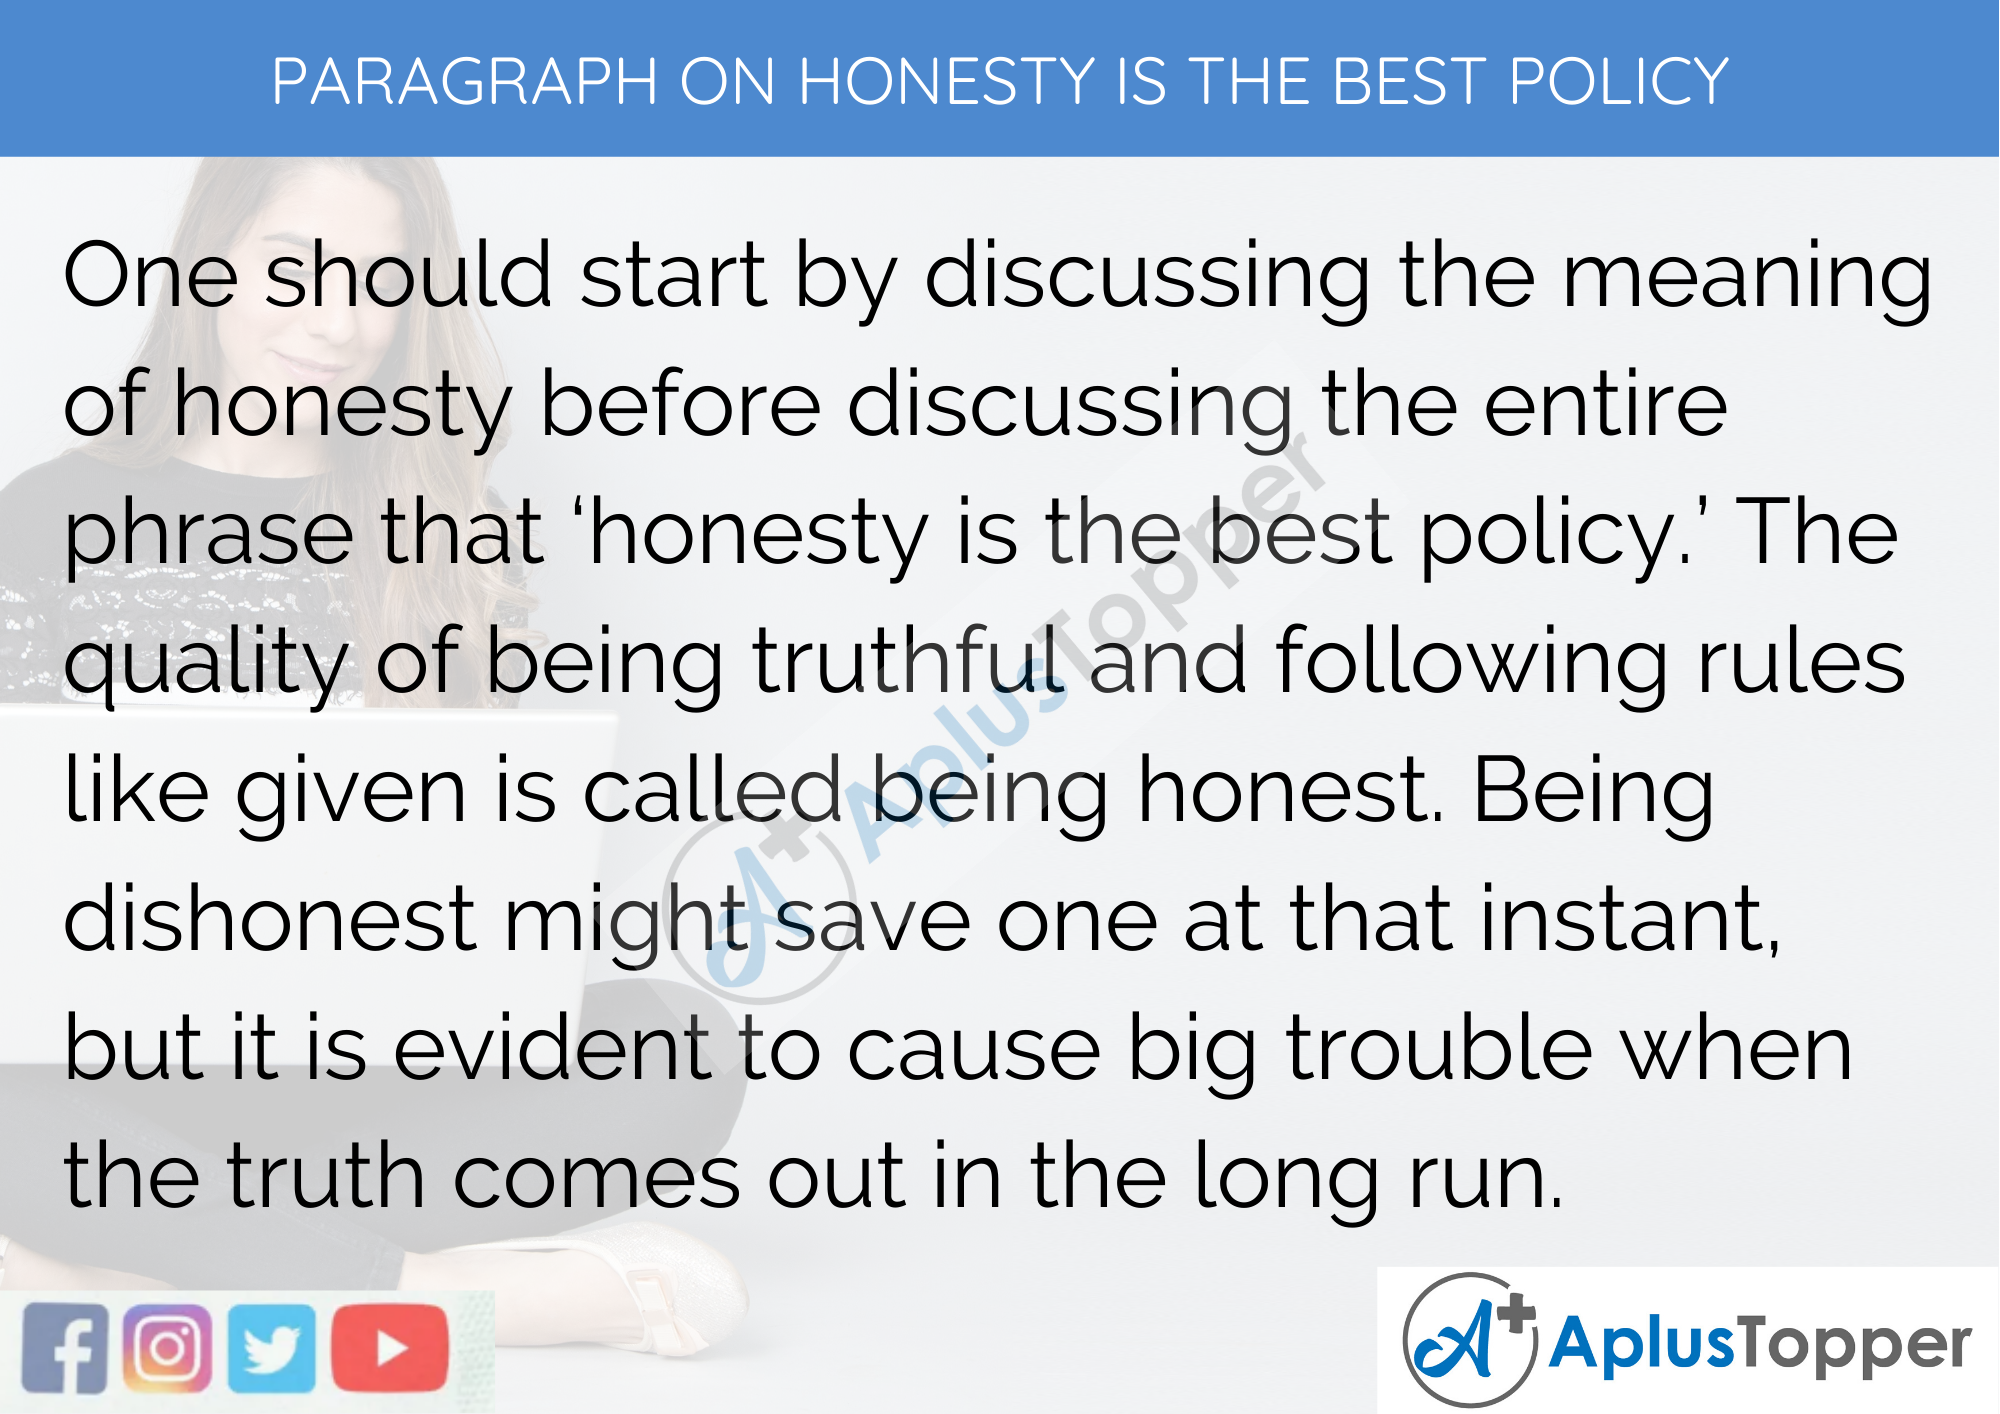 paragraph on honesty